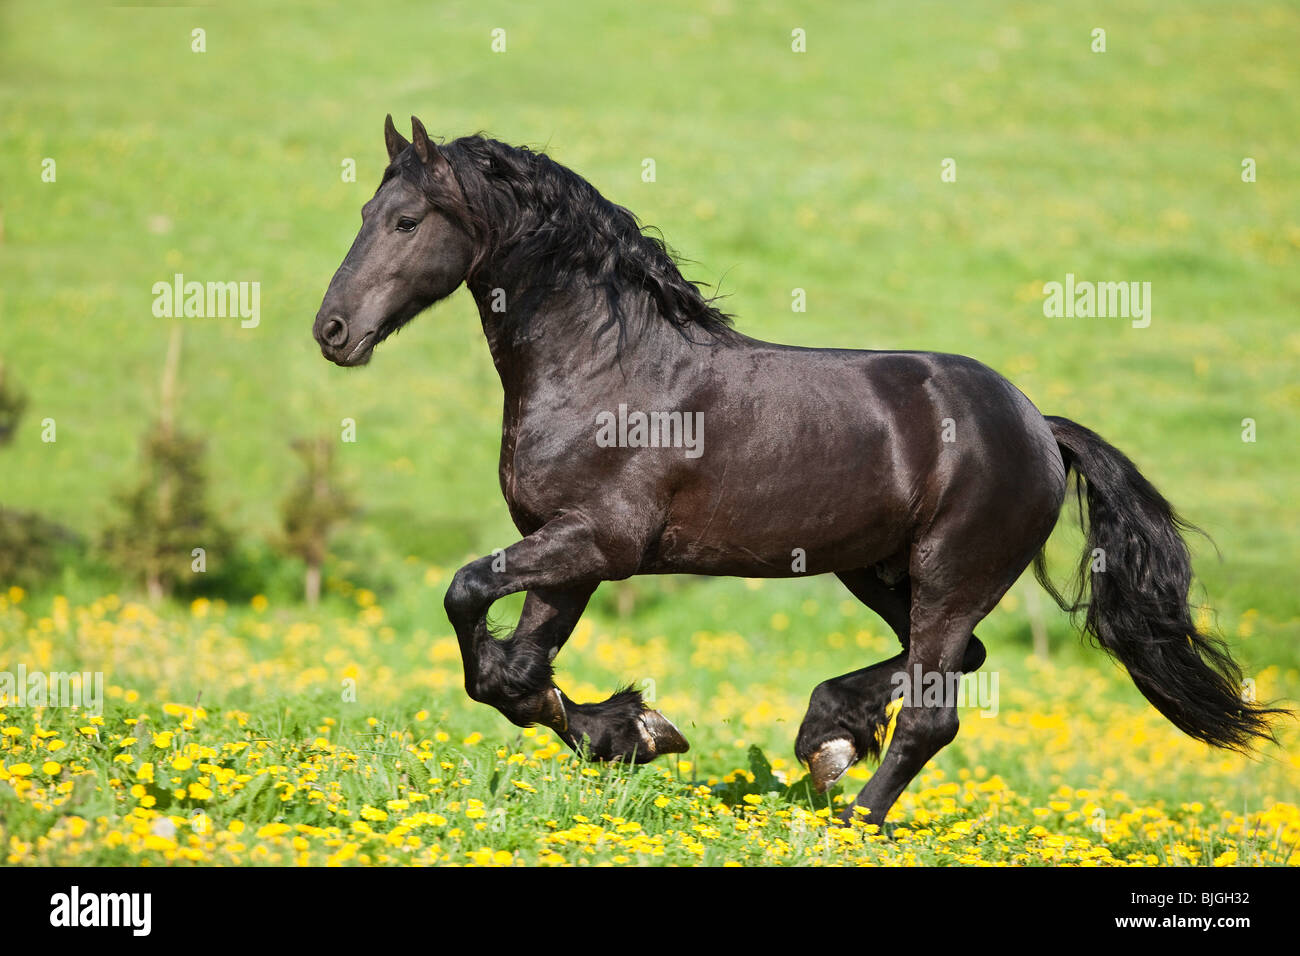 Friesian horse galloping on a meadow Stock Photo